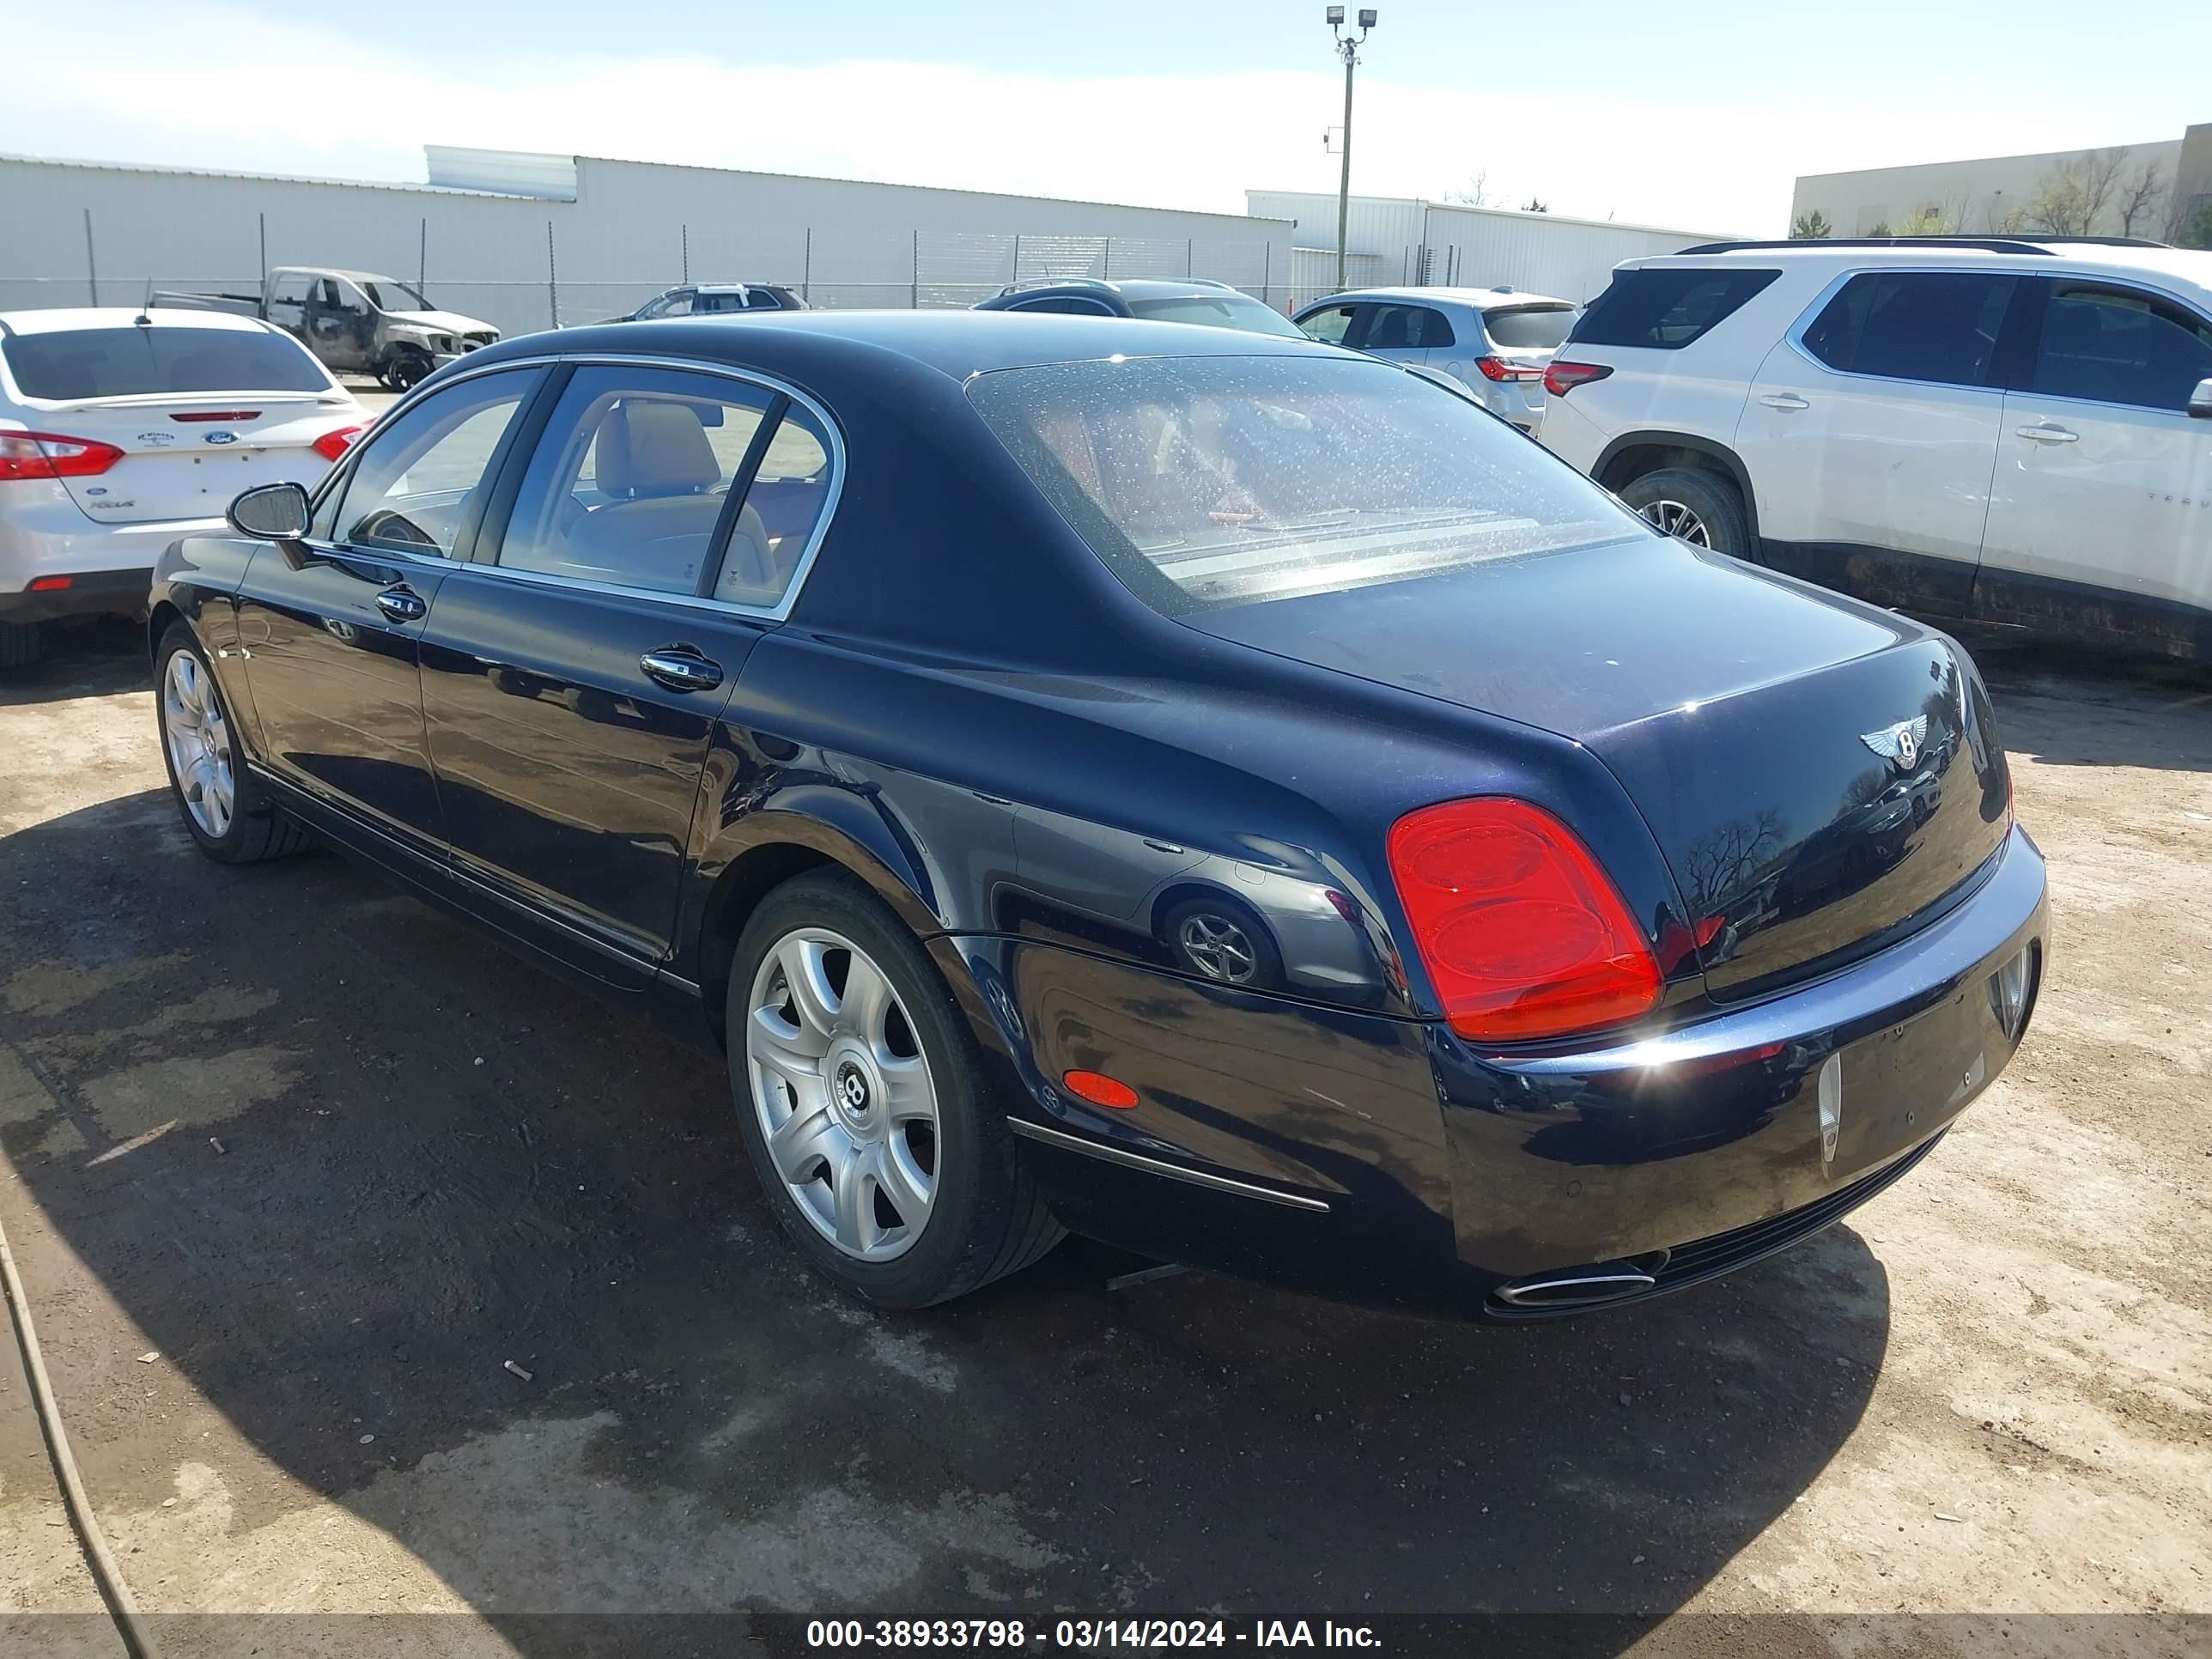 Photo 2 VIN: SCBBR53W46C034805 - BENTLEY CONTINENTAL FLYING SPUR 